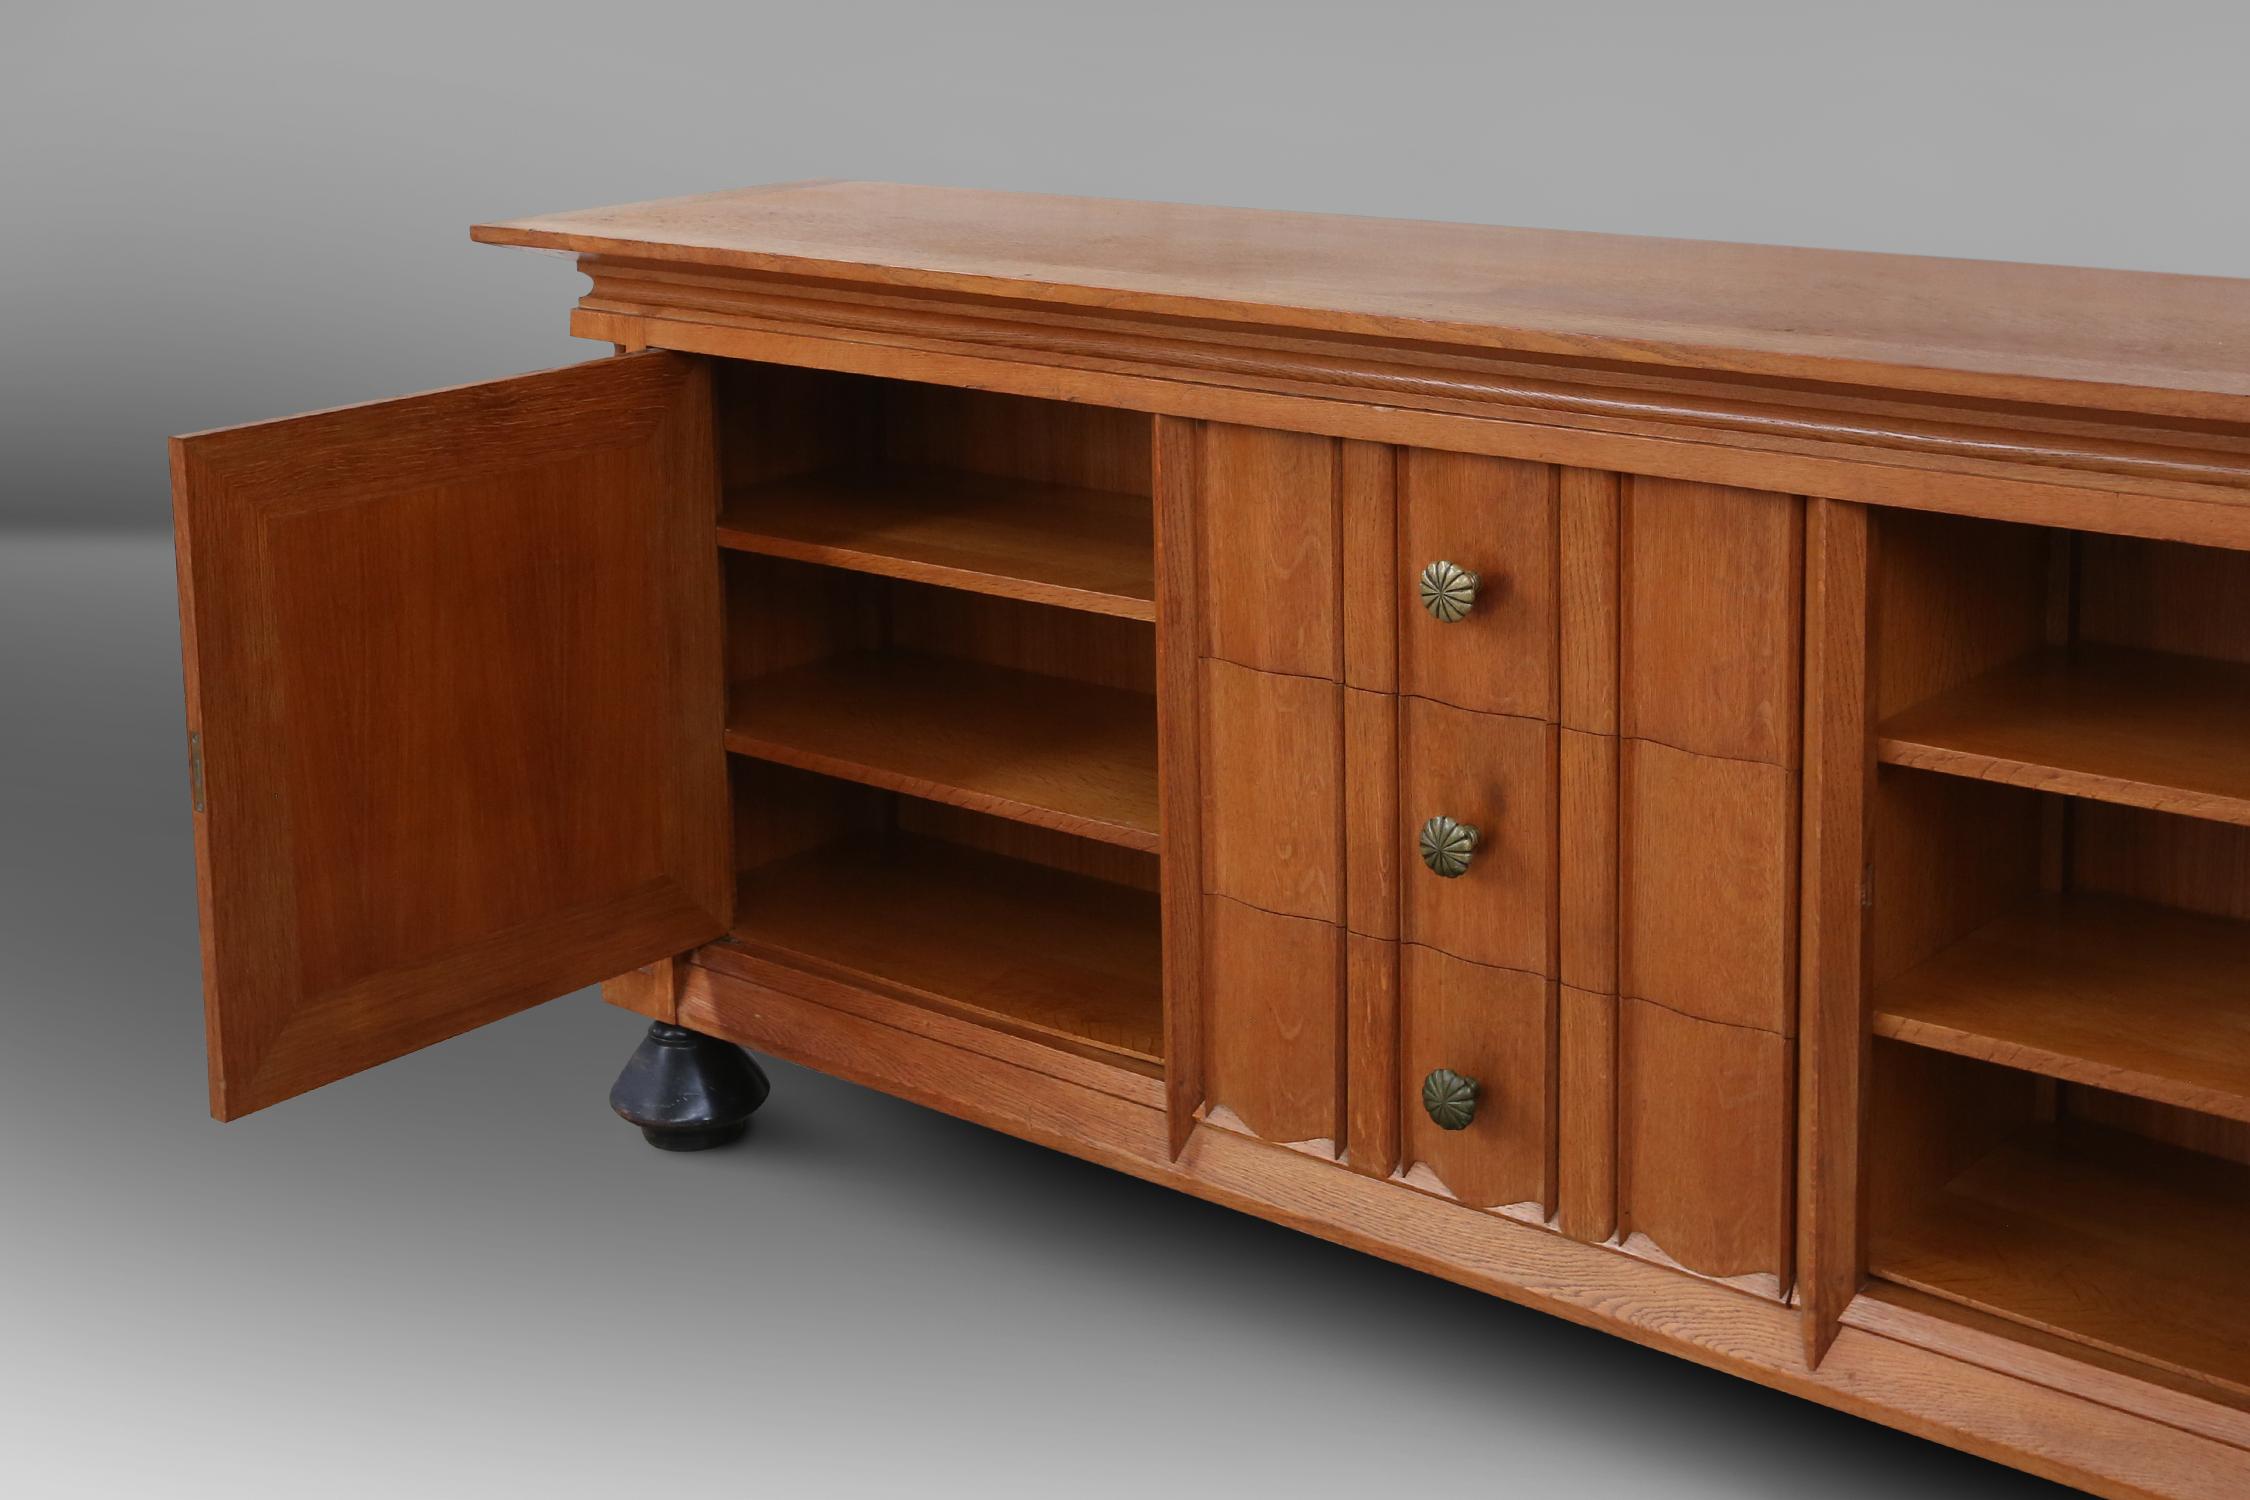 Belgian Late Art Deco Sideboard in Solid Oak and Brass Details For Sale 10